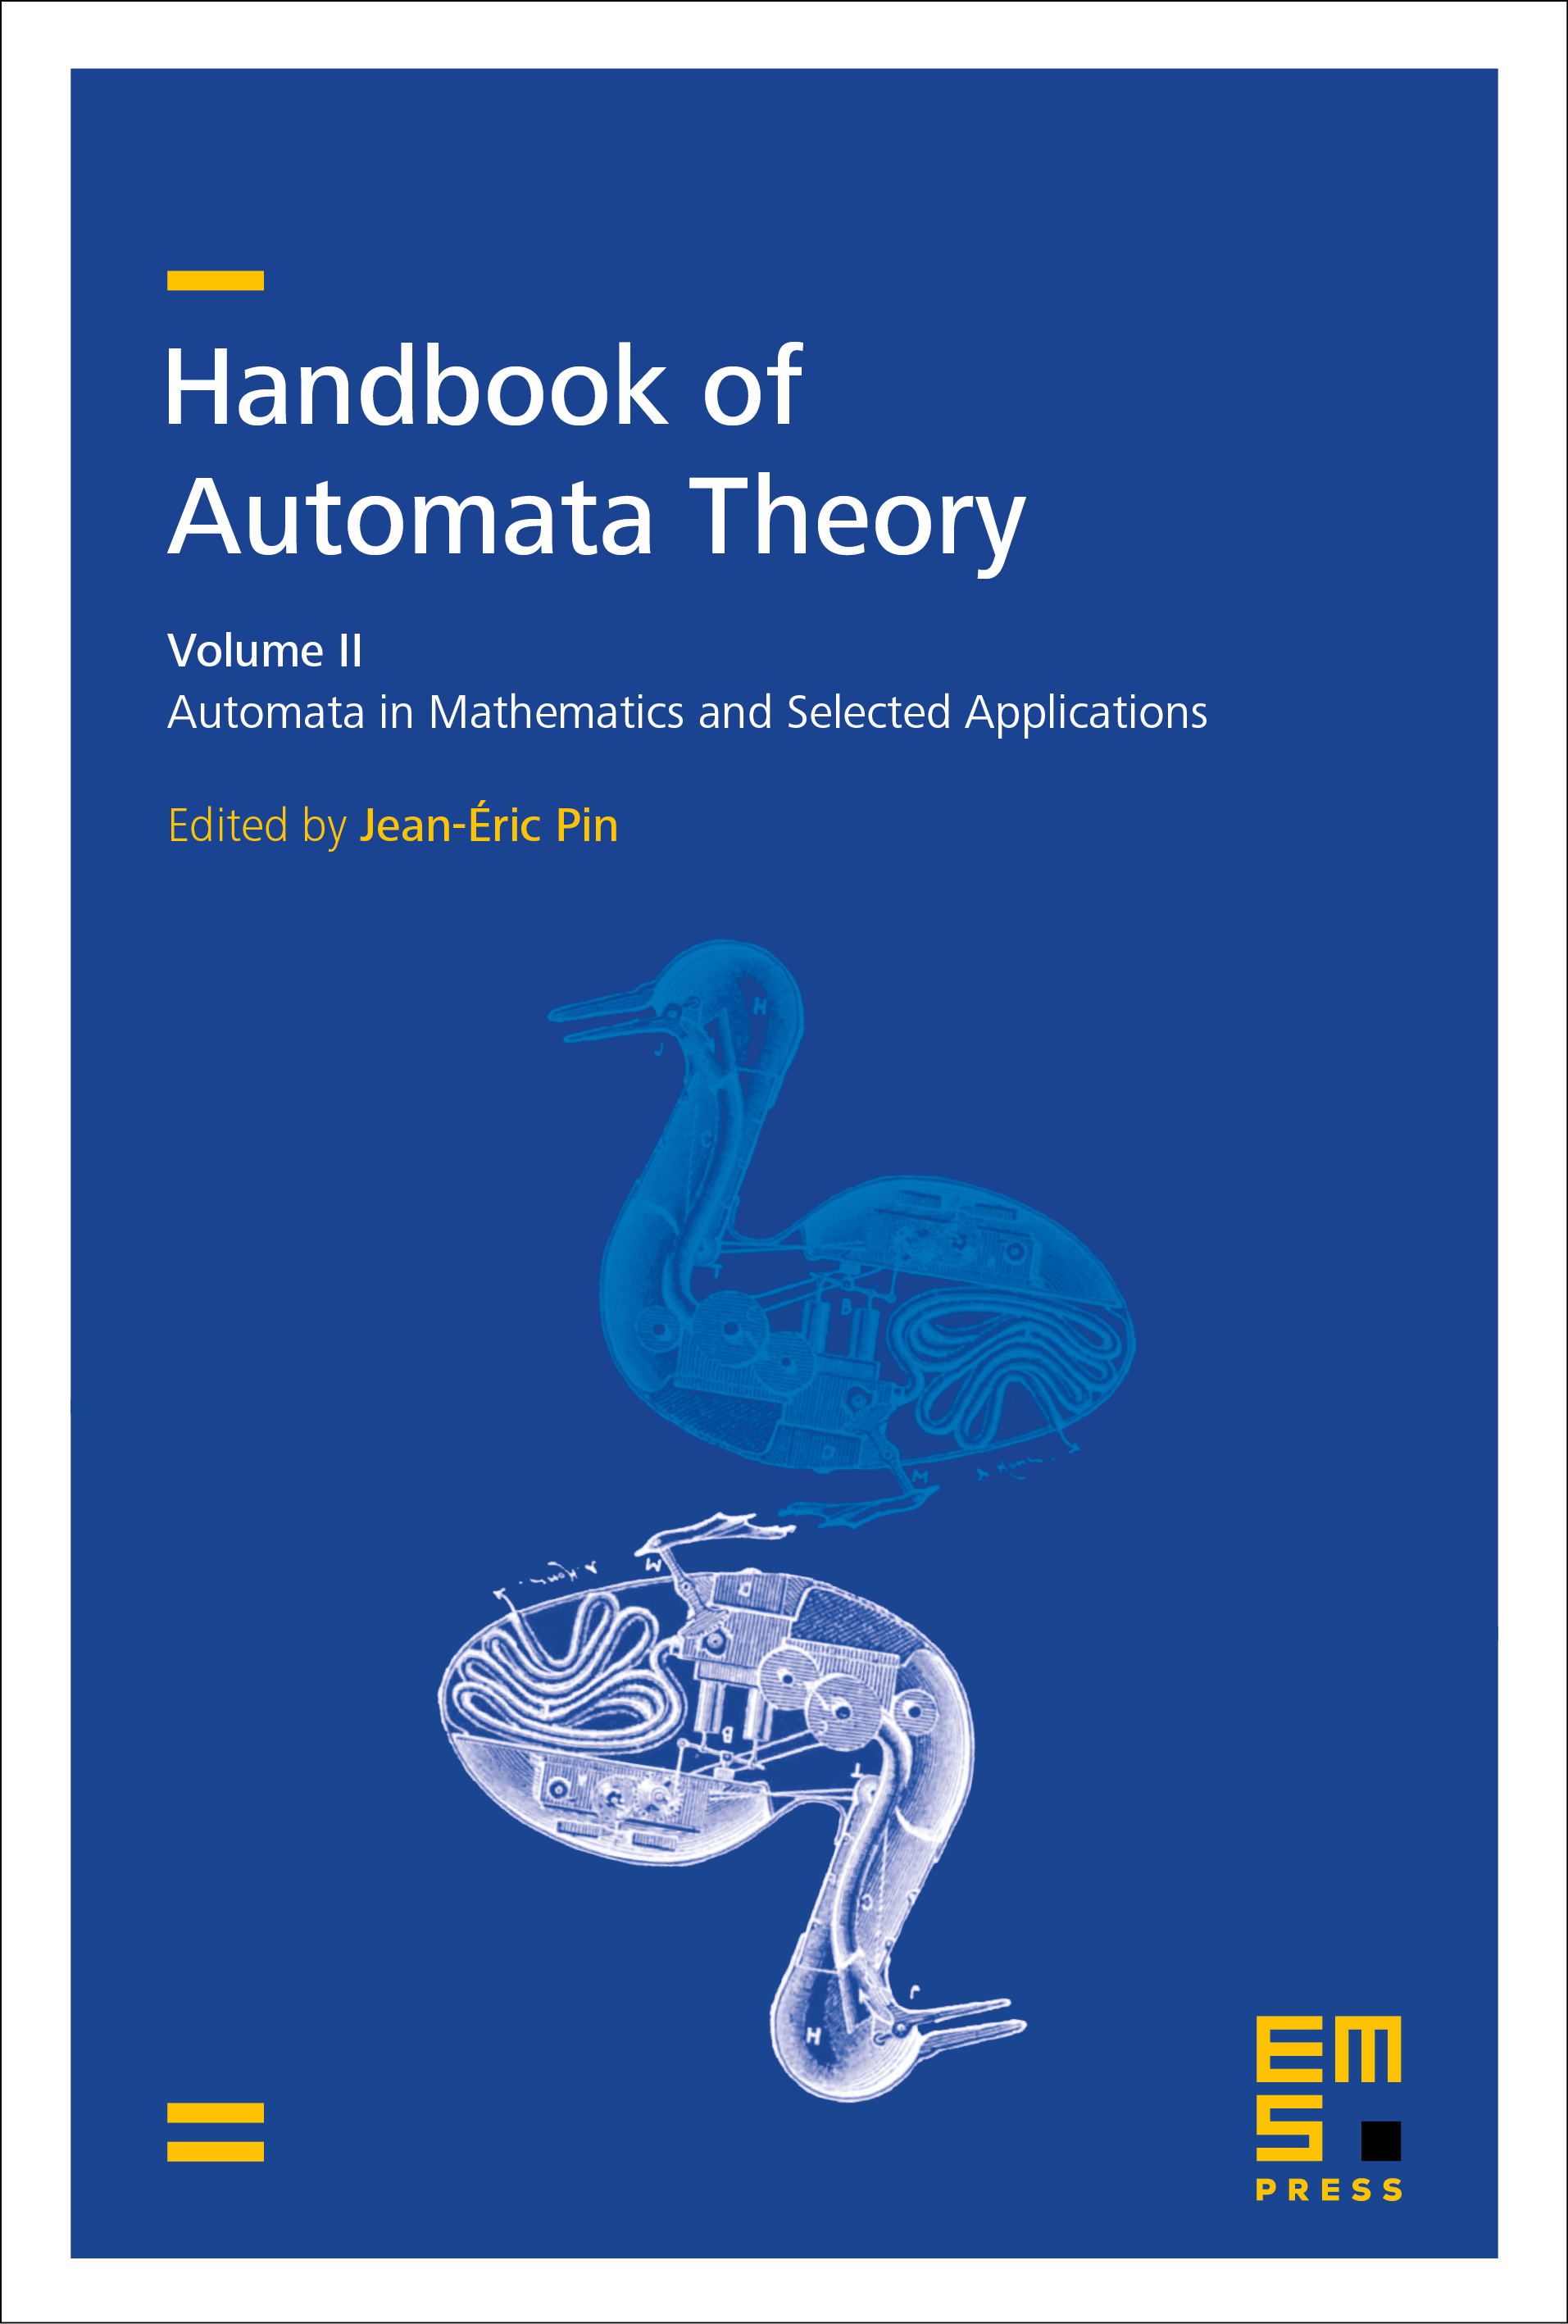 Finite automata, image manipulation, and automatic real functions cover